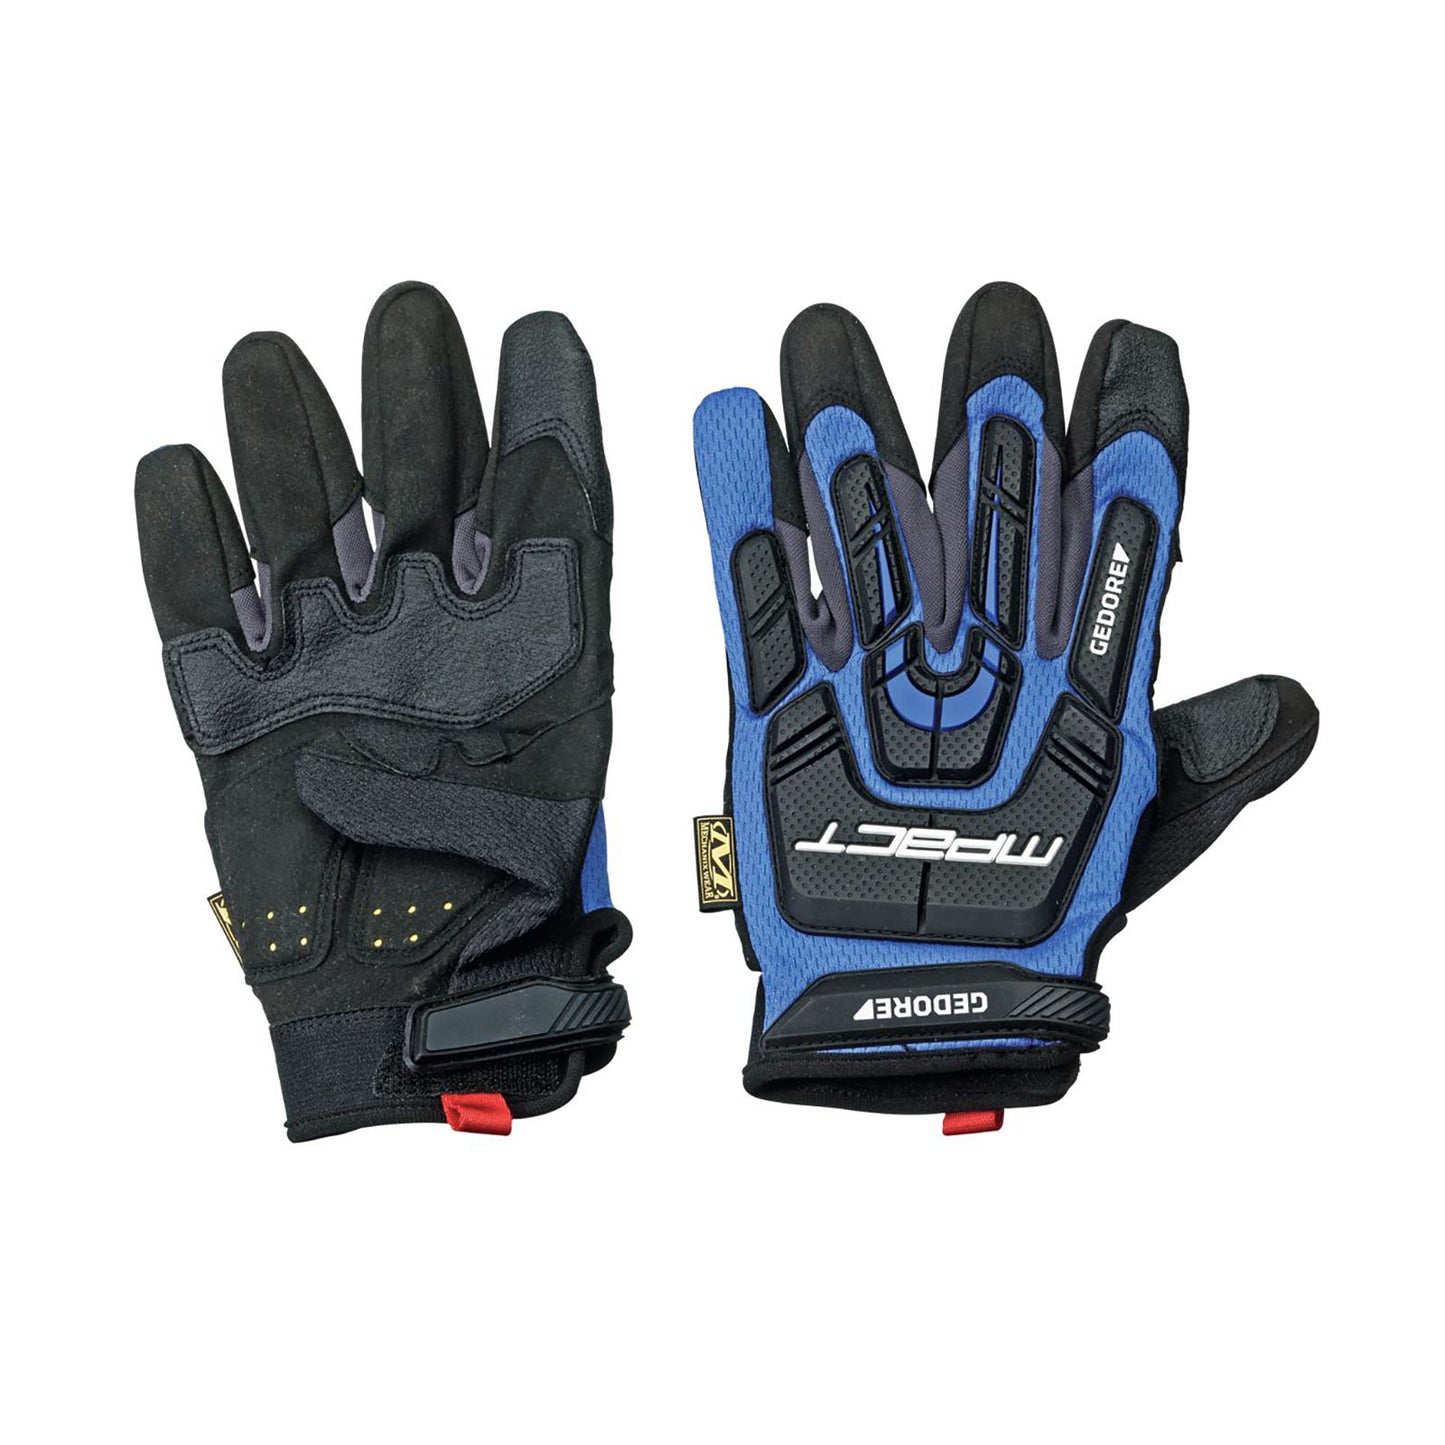 GEDORE 922 8 - Gants M-PACT Taille S/8 (1938738)